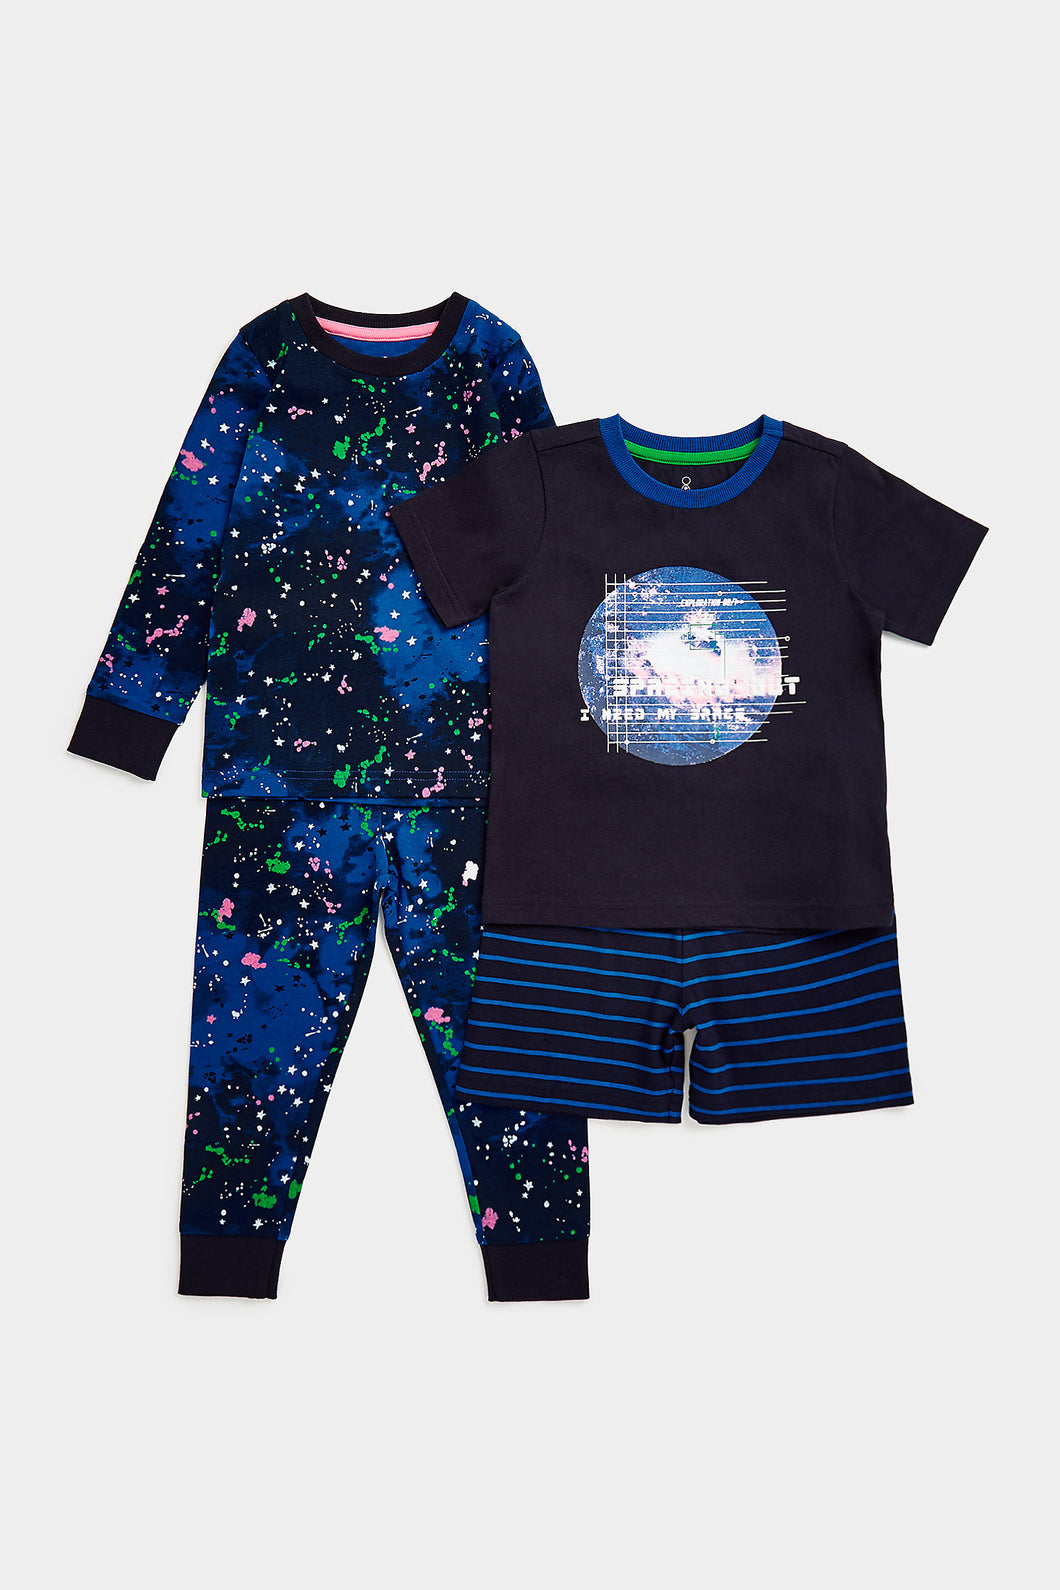 Mothercare Spacing Out Long And Short Pyjamas - 2 Pack